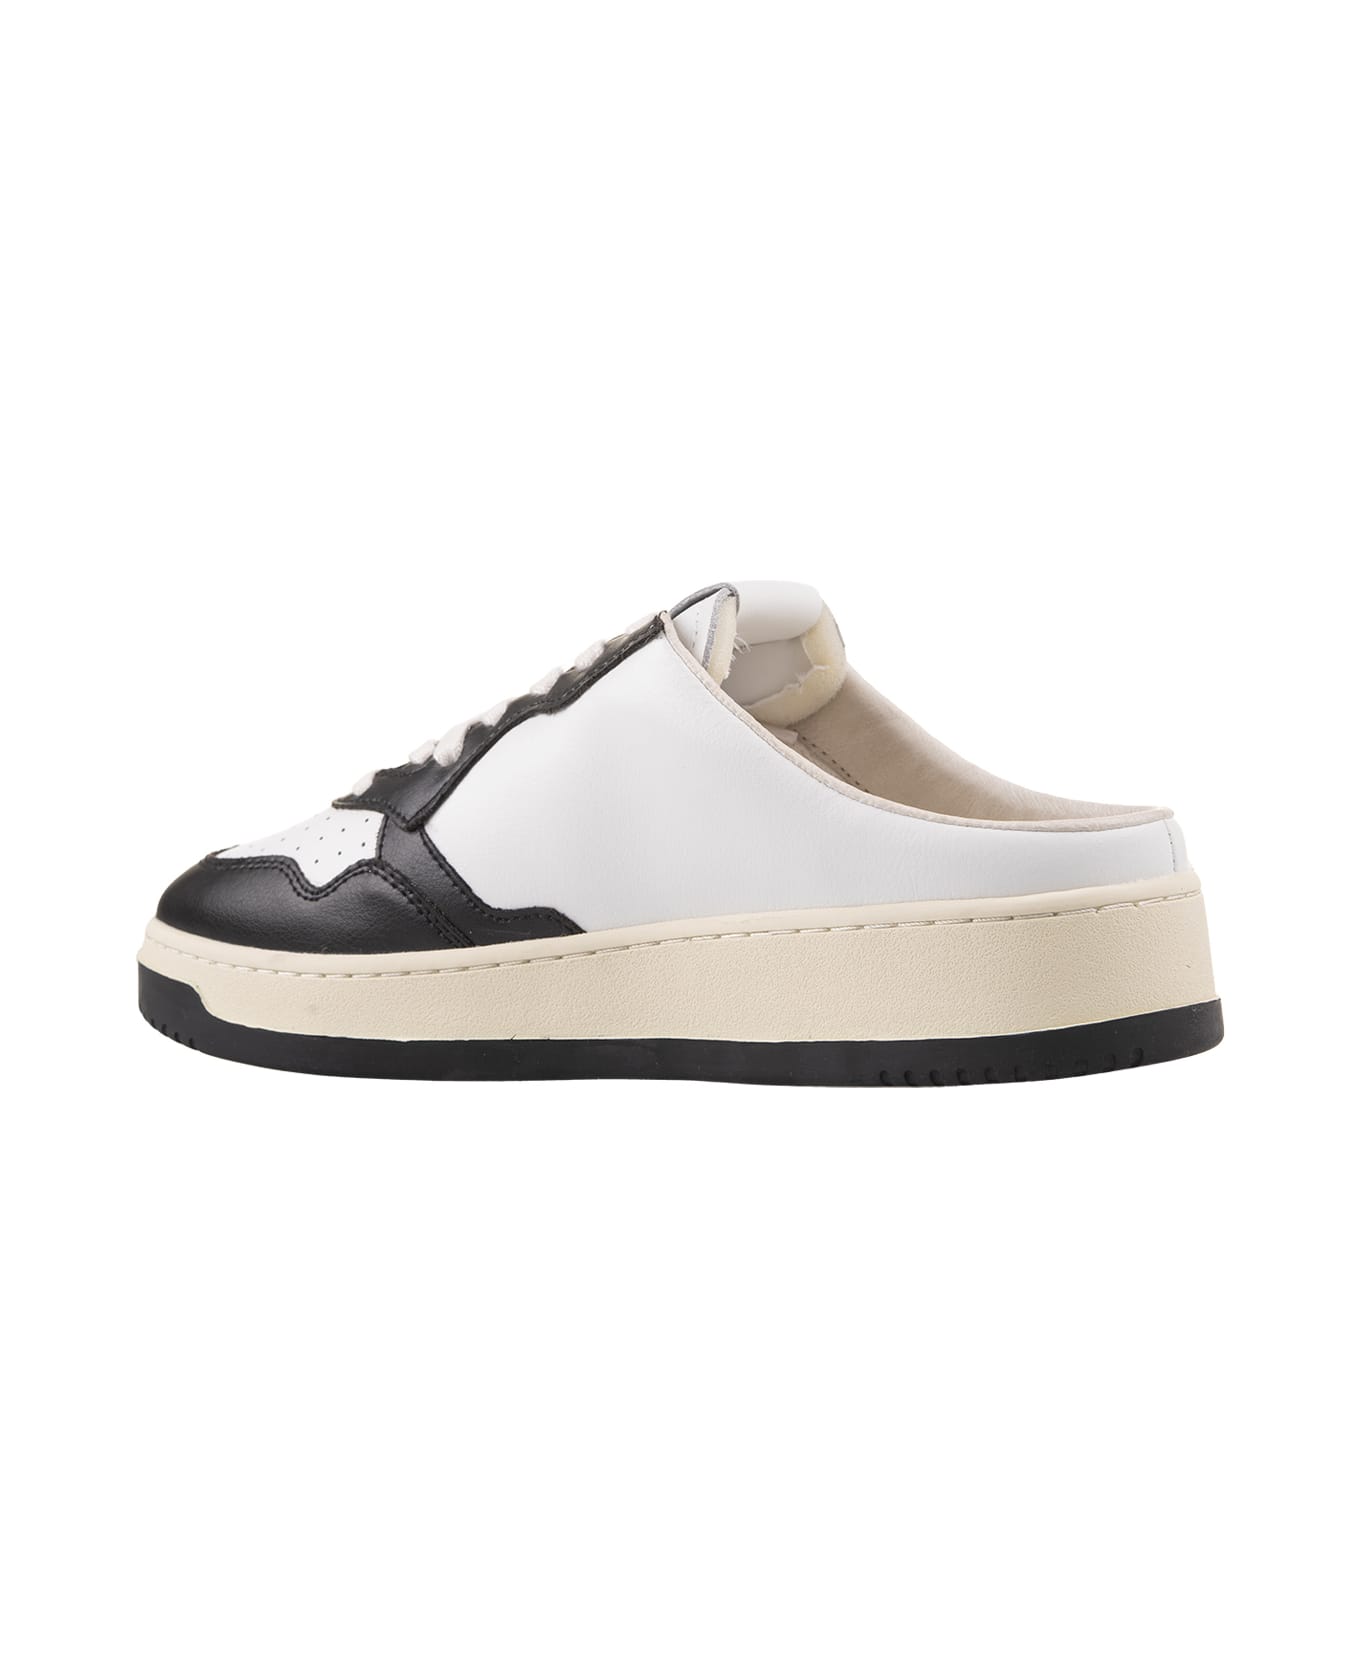 Autry White And Black Medalist Mule Sneakers - Black